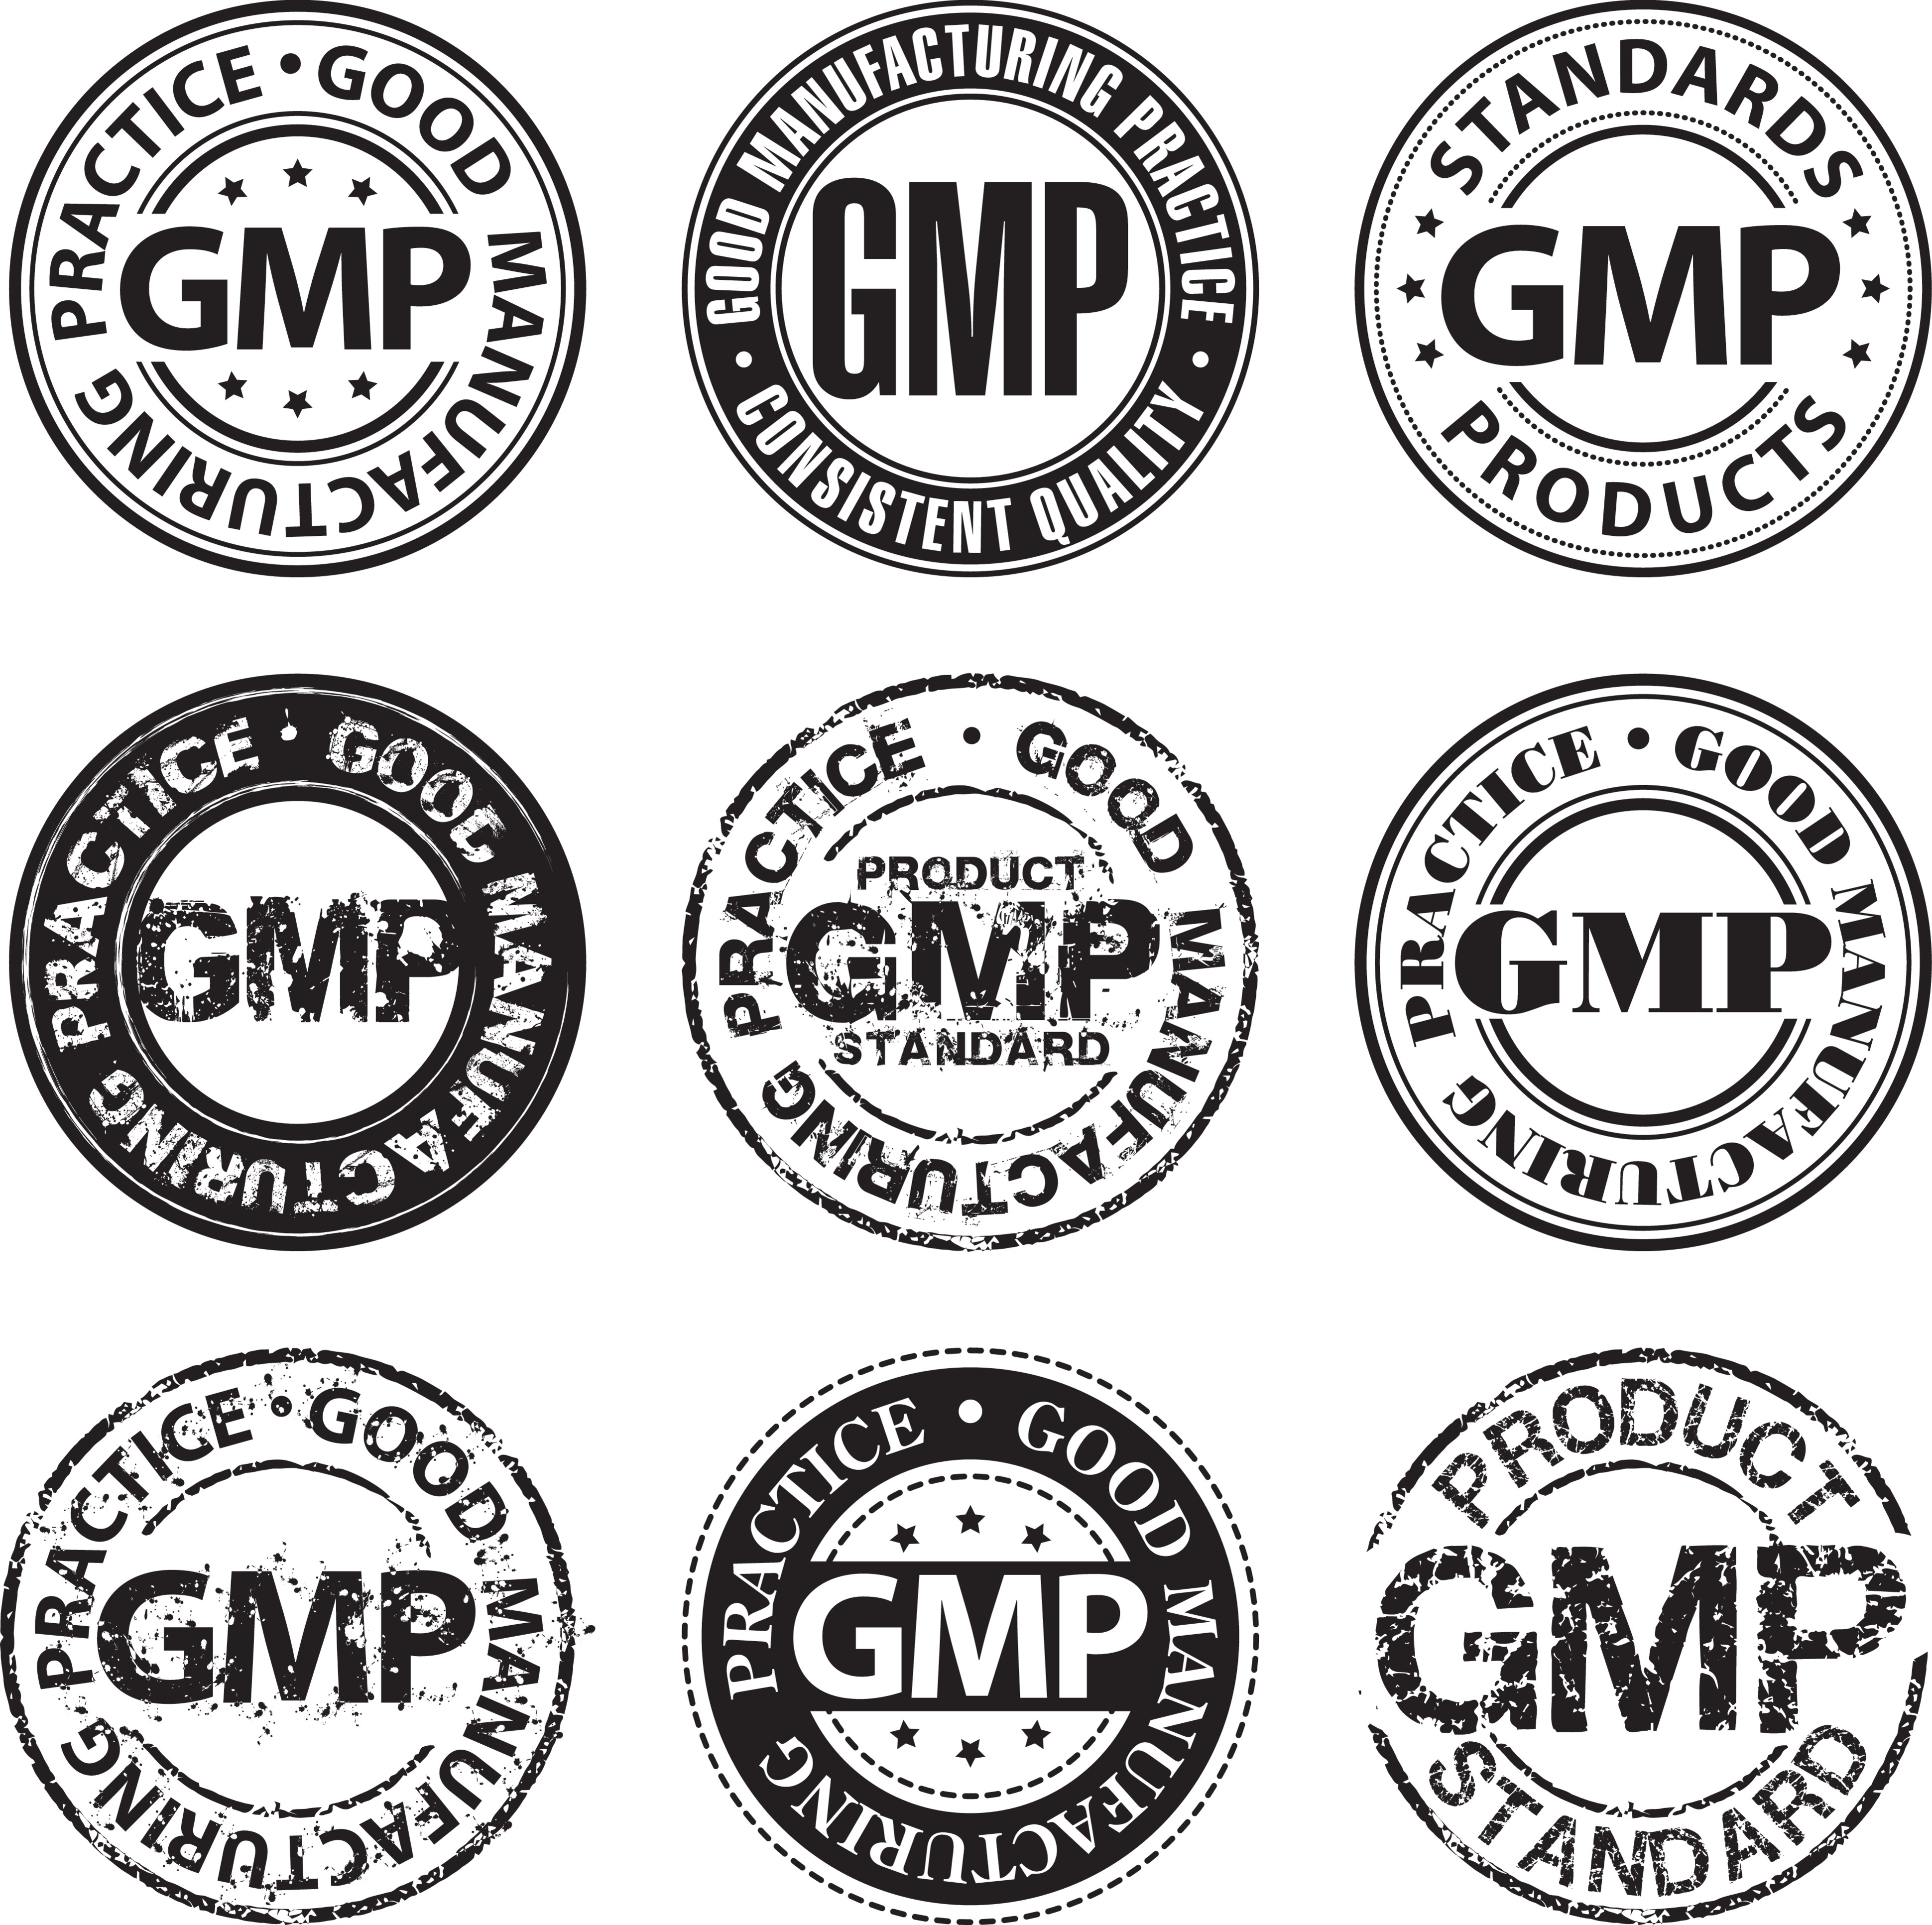 What Does it Mean for a Product to Carry the GMP Seal?